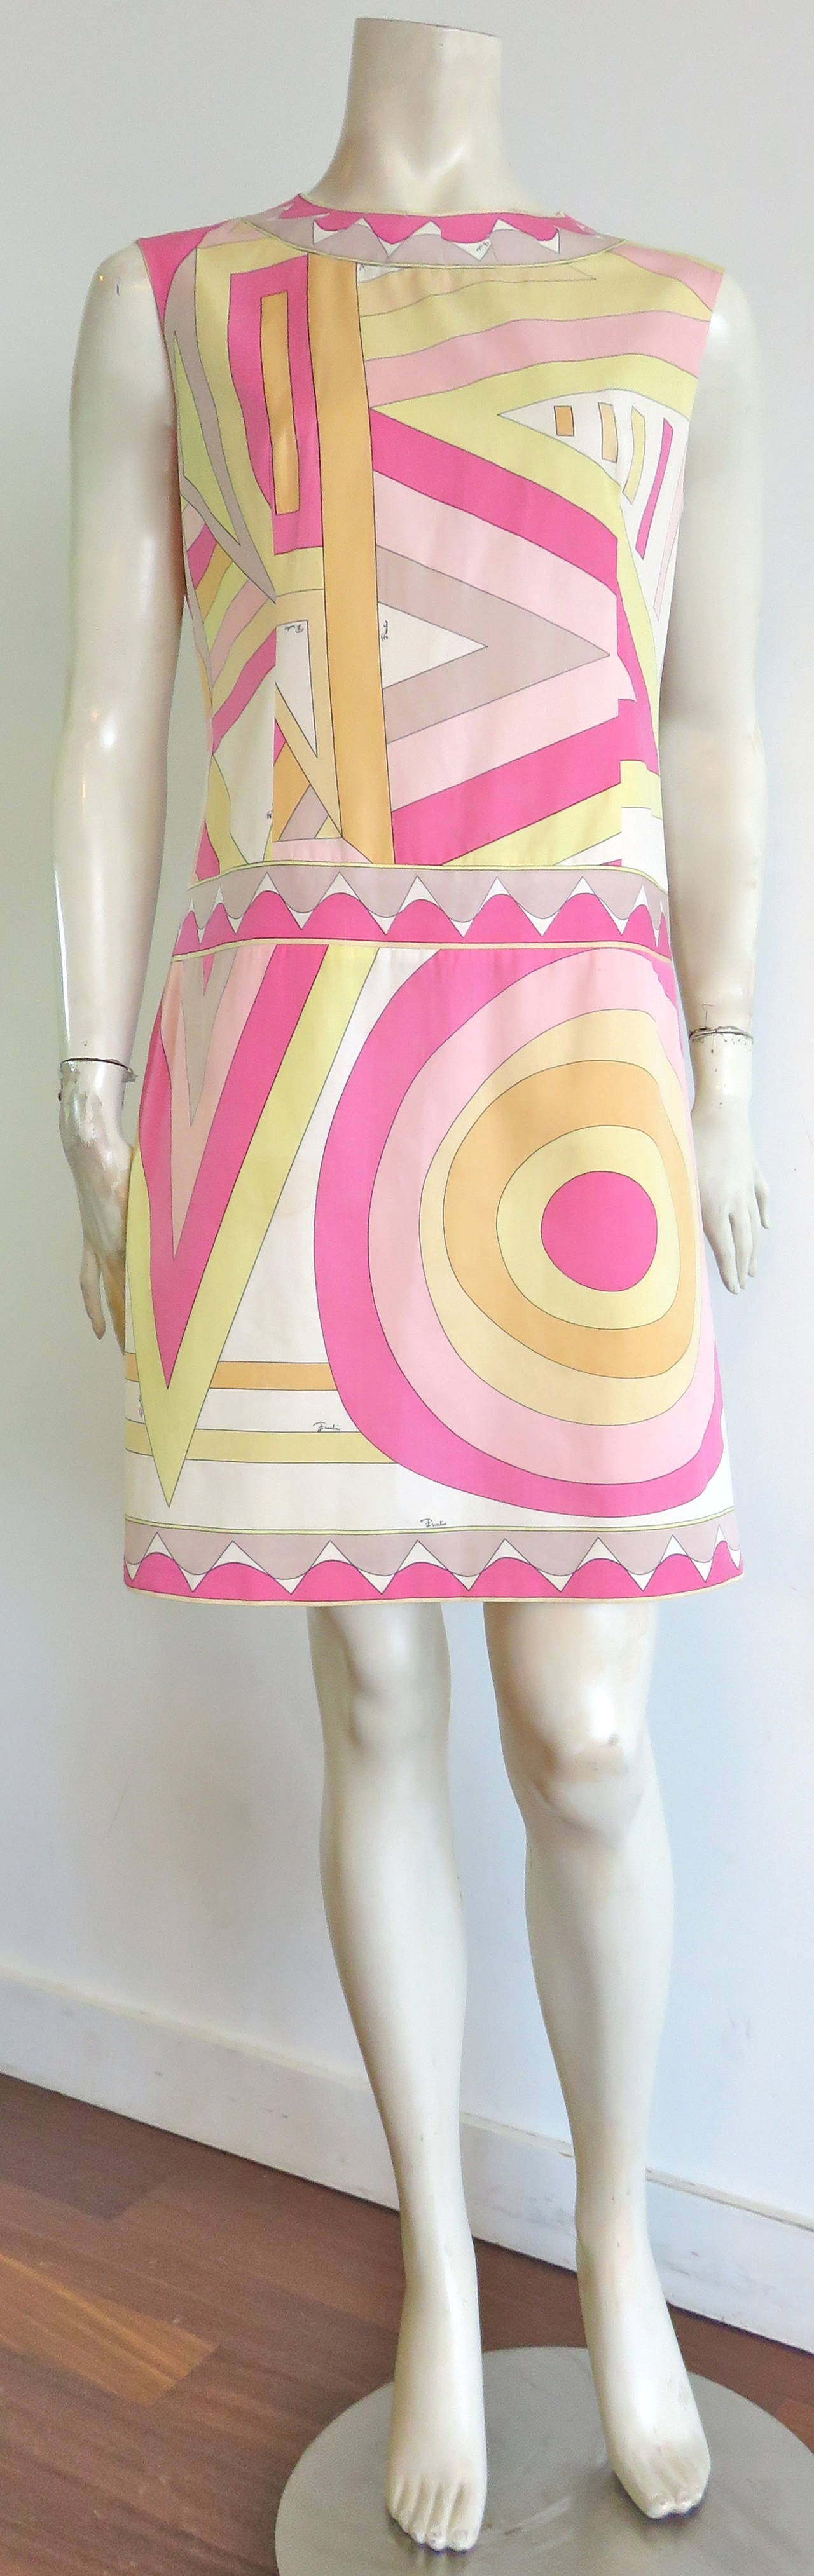 1960's EMILIO PUCCI Pastel geometric printed dress.

Signature, printed artwork atop cotton twill base cloth.

Engineered border artwork at neck, waist, and hemline.

Darted construction at neckline.

Dropped waist, 1920's inspired